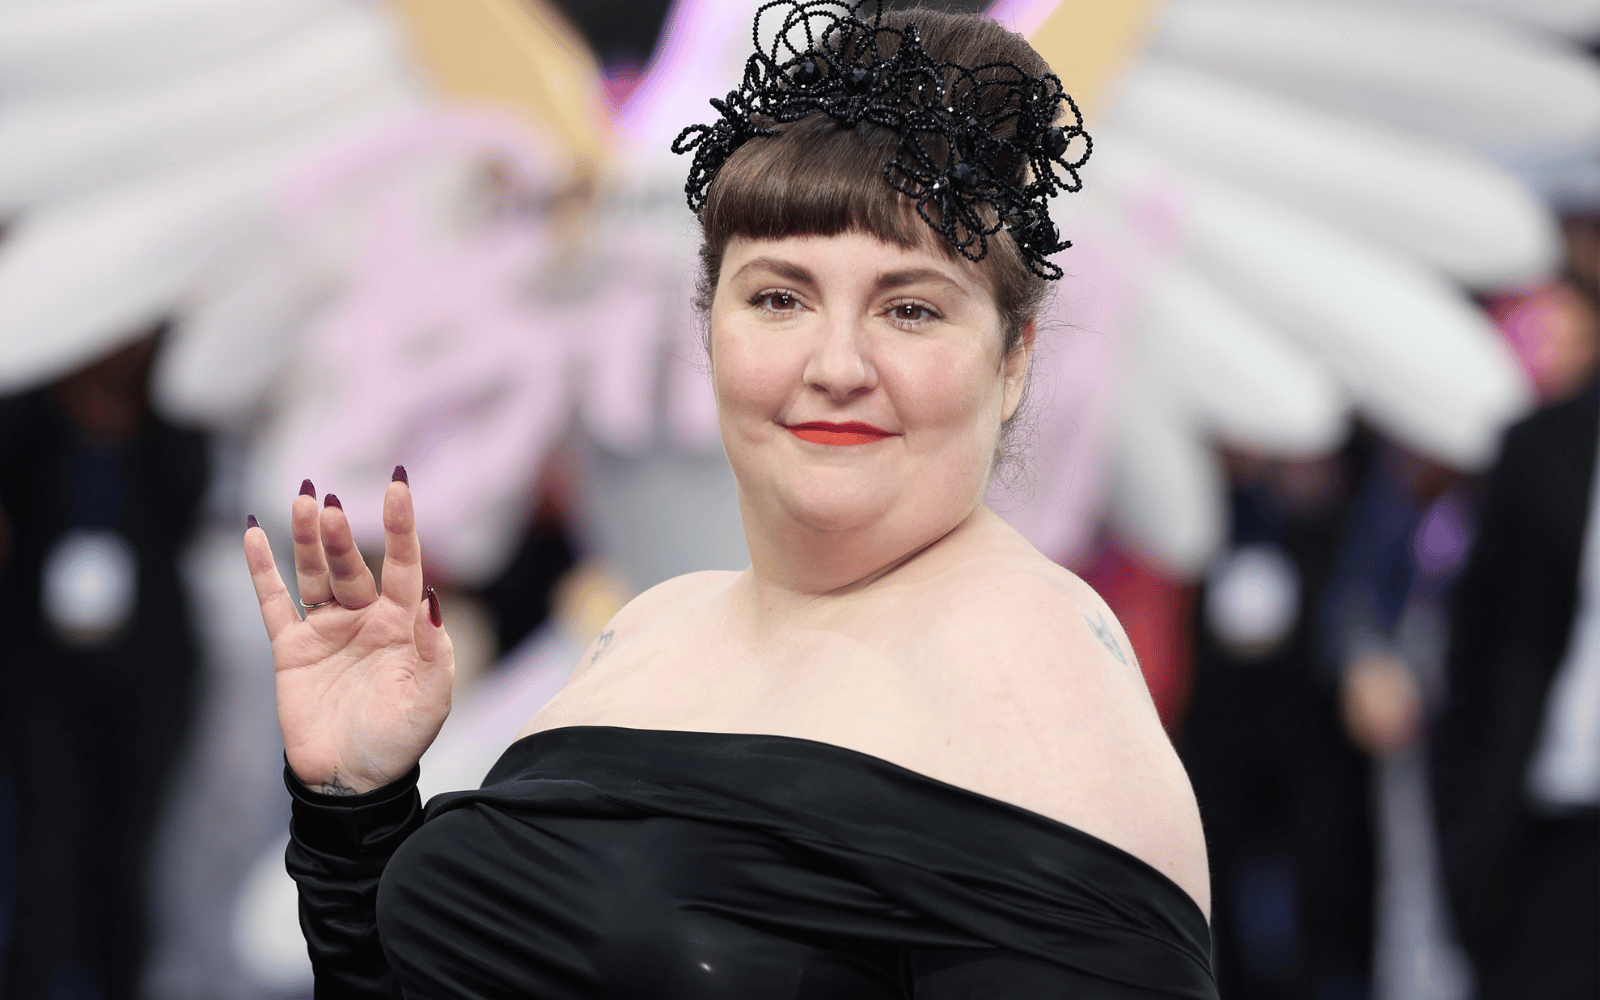 Lena Dunham sparks backlash after saying she wants her coffin ‘driven through NYC Pride parade’